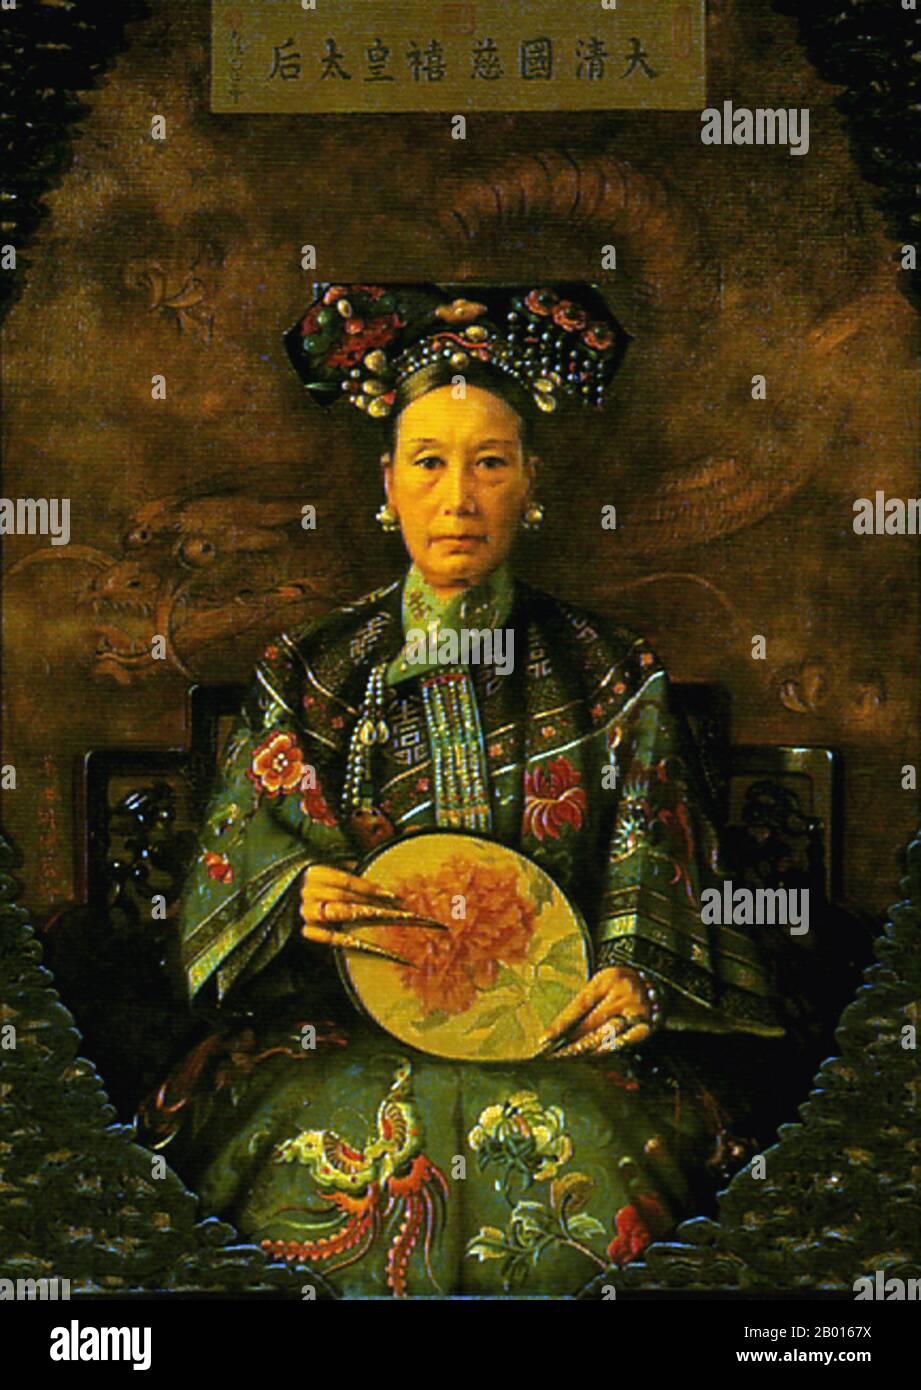 China: Empress Dowager Cixi (29 November 1835 - 15 November 1908). Oil on canvas painting by Hubert Vos (1855-1935), 1905.  Empress Dowager Cixi, personal name Xingzhen, was the concubine of the Xianfeng Emperor. Of the Manchu Yehe Nara Clan, she was a powerful and charismatic figure who became the de facto ruler of the Qing Dynasty for 47 years, from 1861 to 1908. Her son became the Tongzhi Emperor, and she ruled as regent in his stead, alongside Empress Dowager Ci'an. She consolidated her control by installing her nephew as the Guangxu Emperor after her son's death. Her legacy is debated. Stock Photo